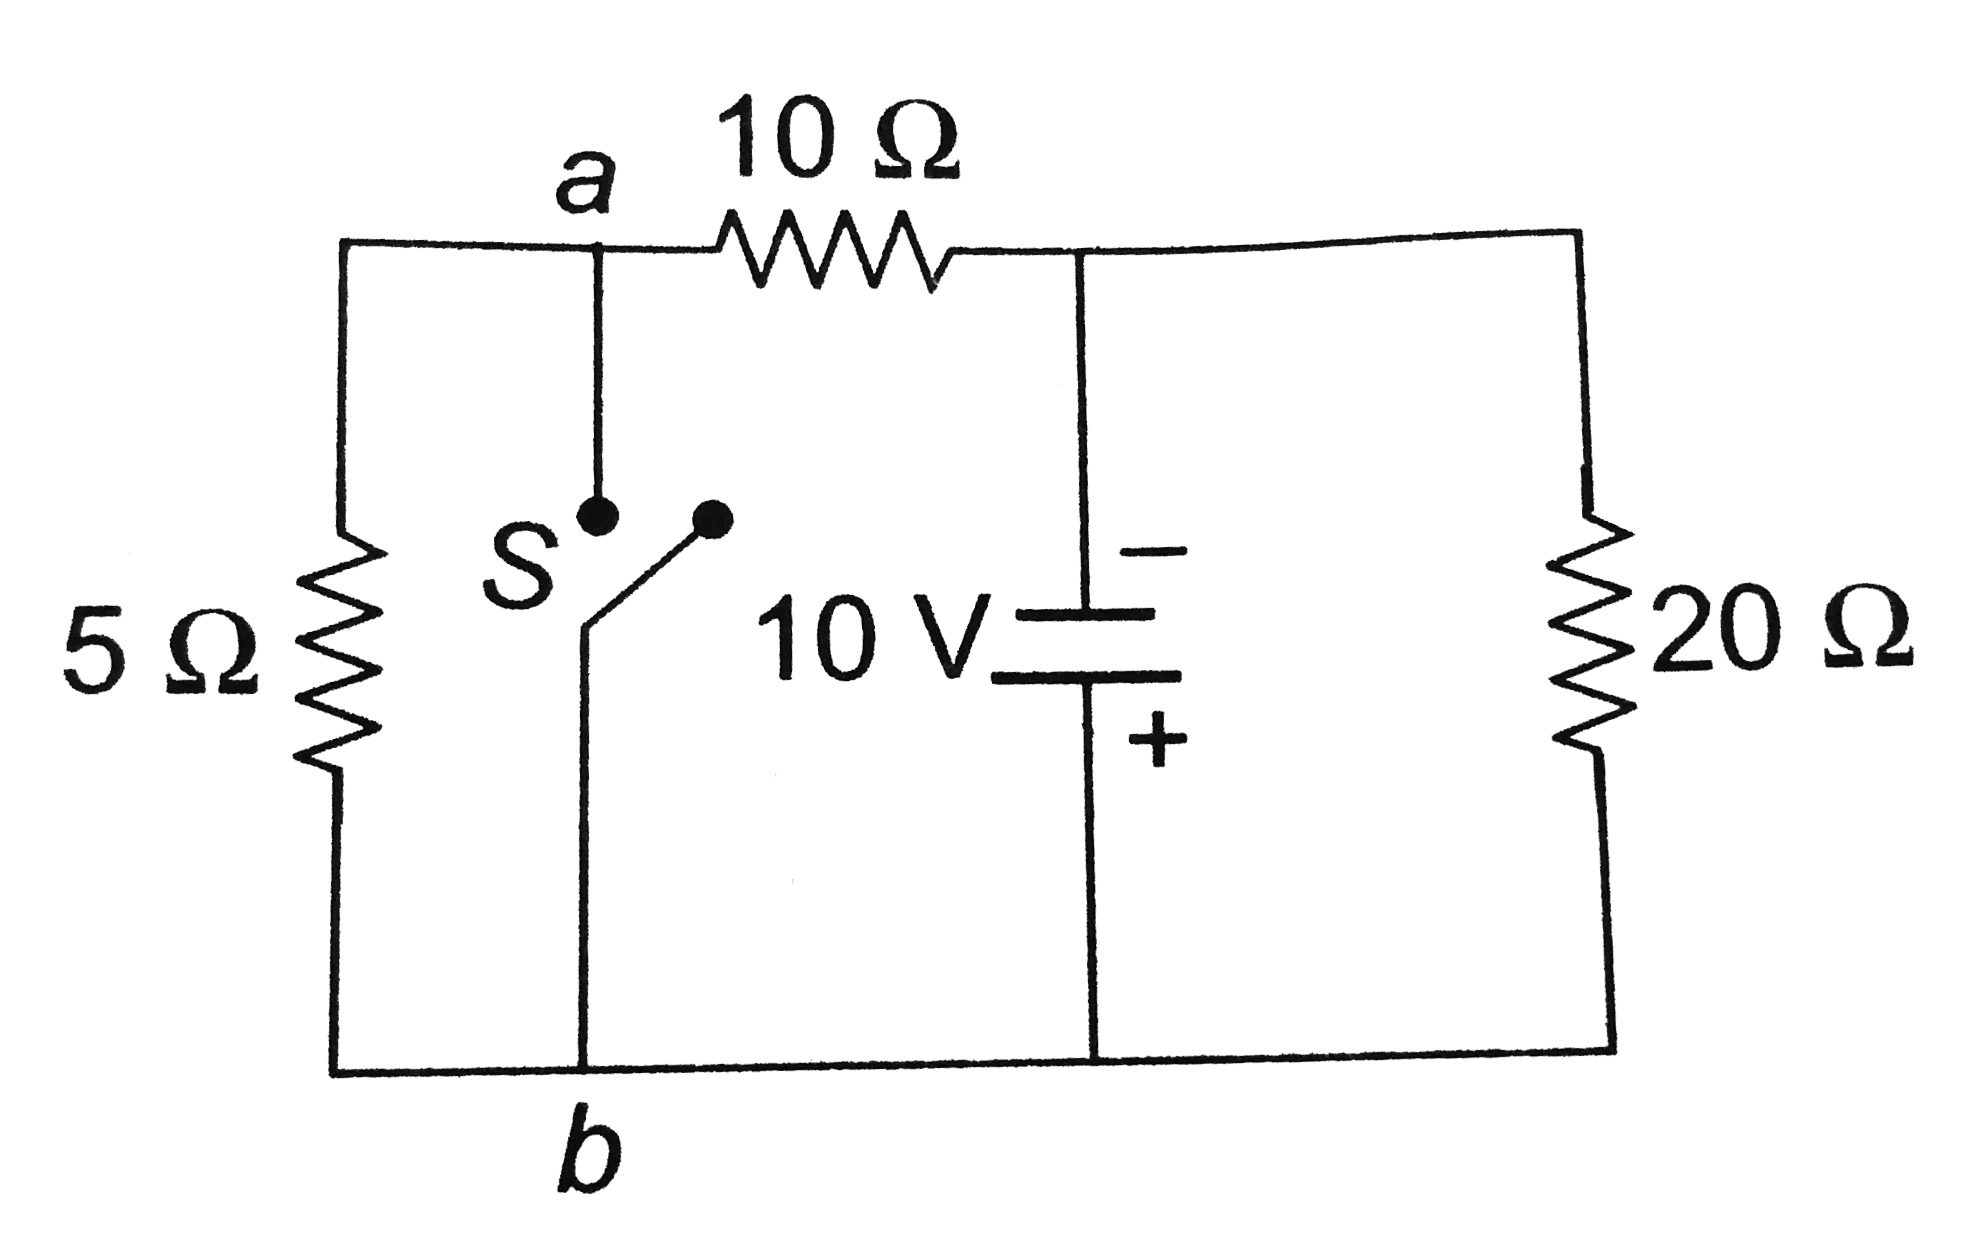 In the circuit shown below, the current that flows from a to b when switch S is closed is